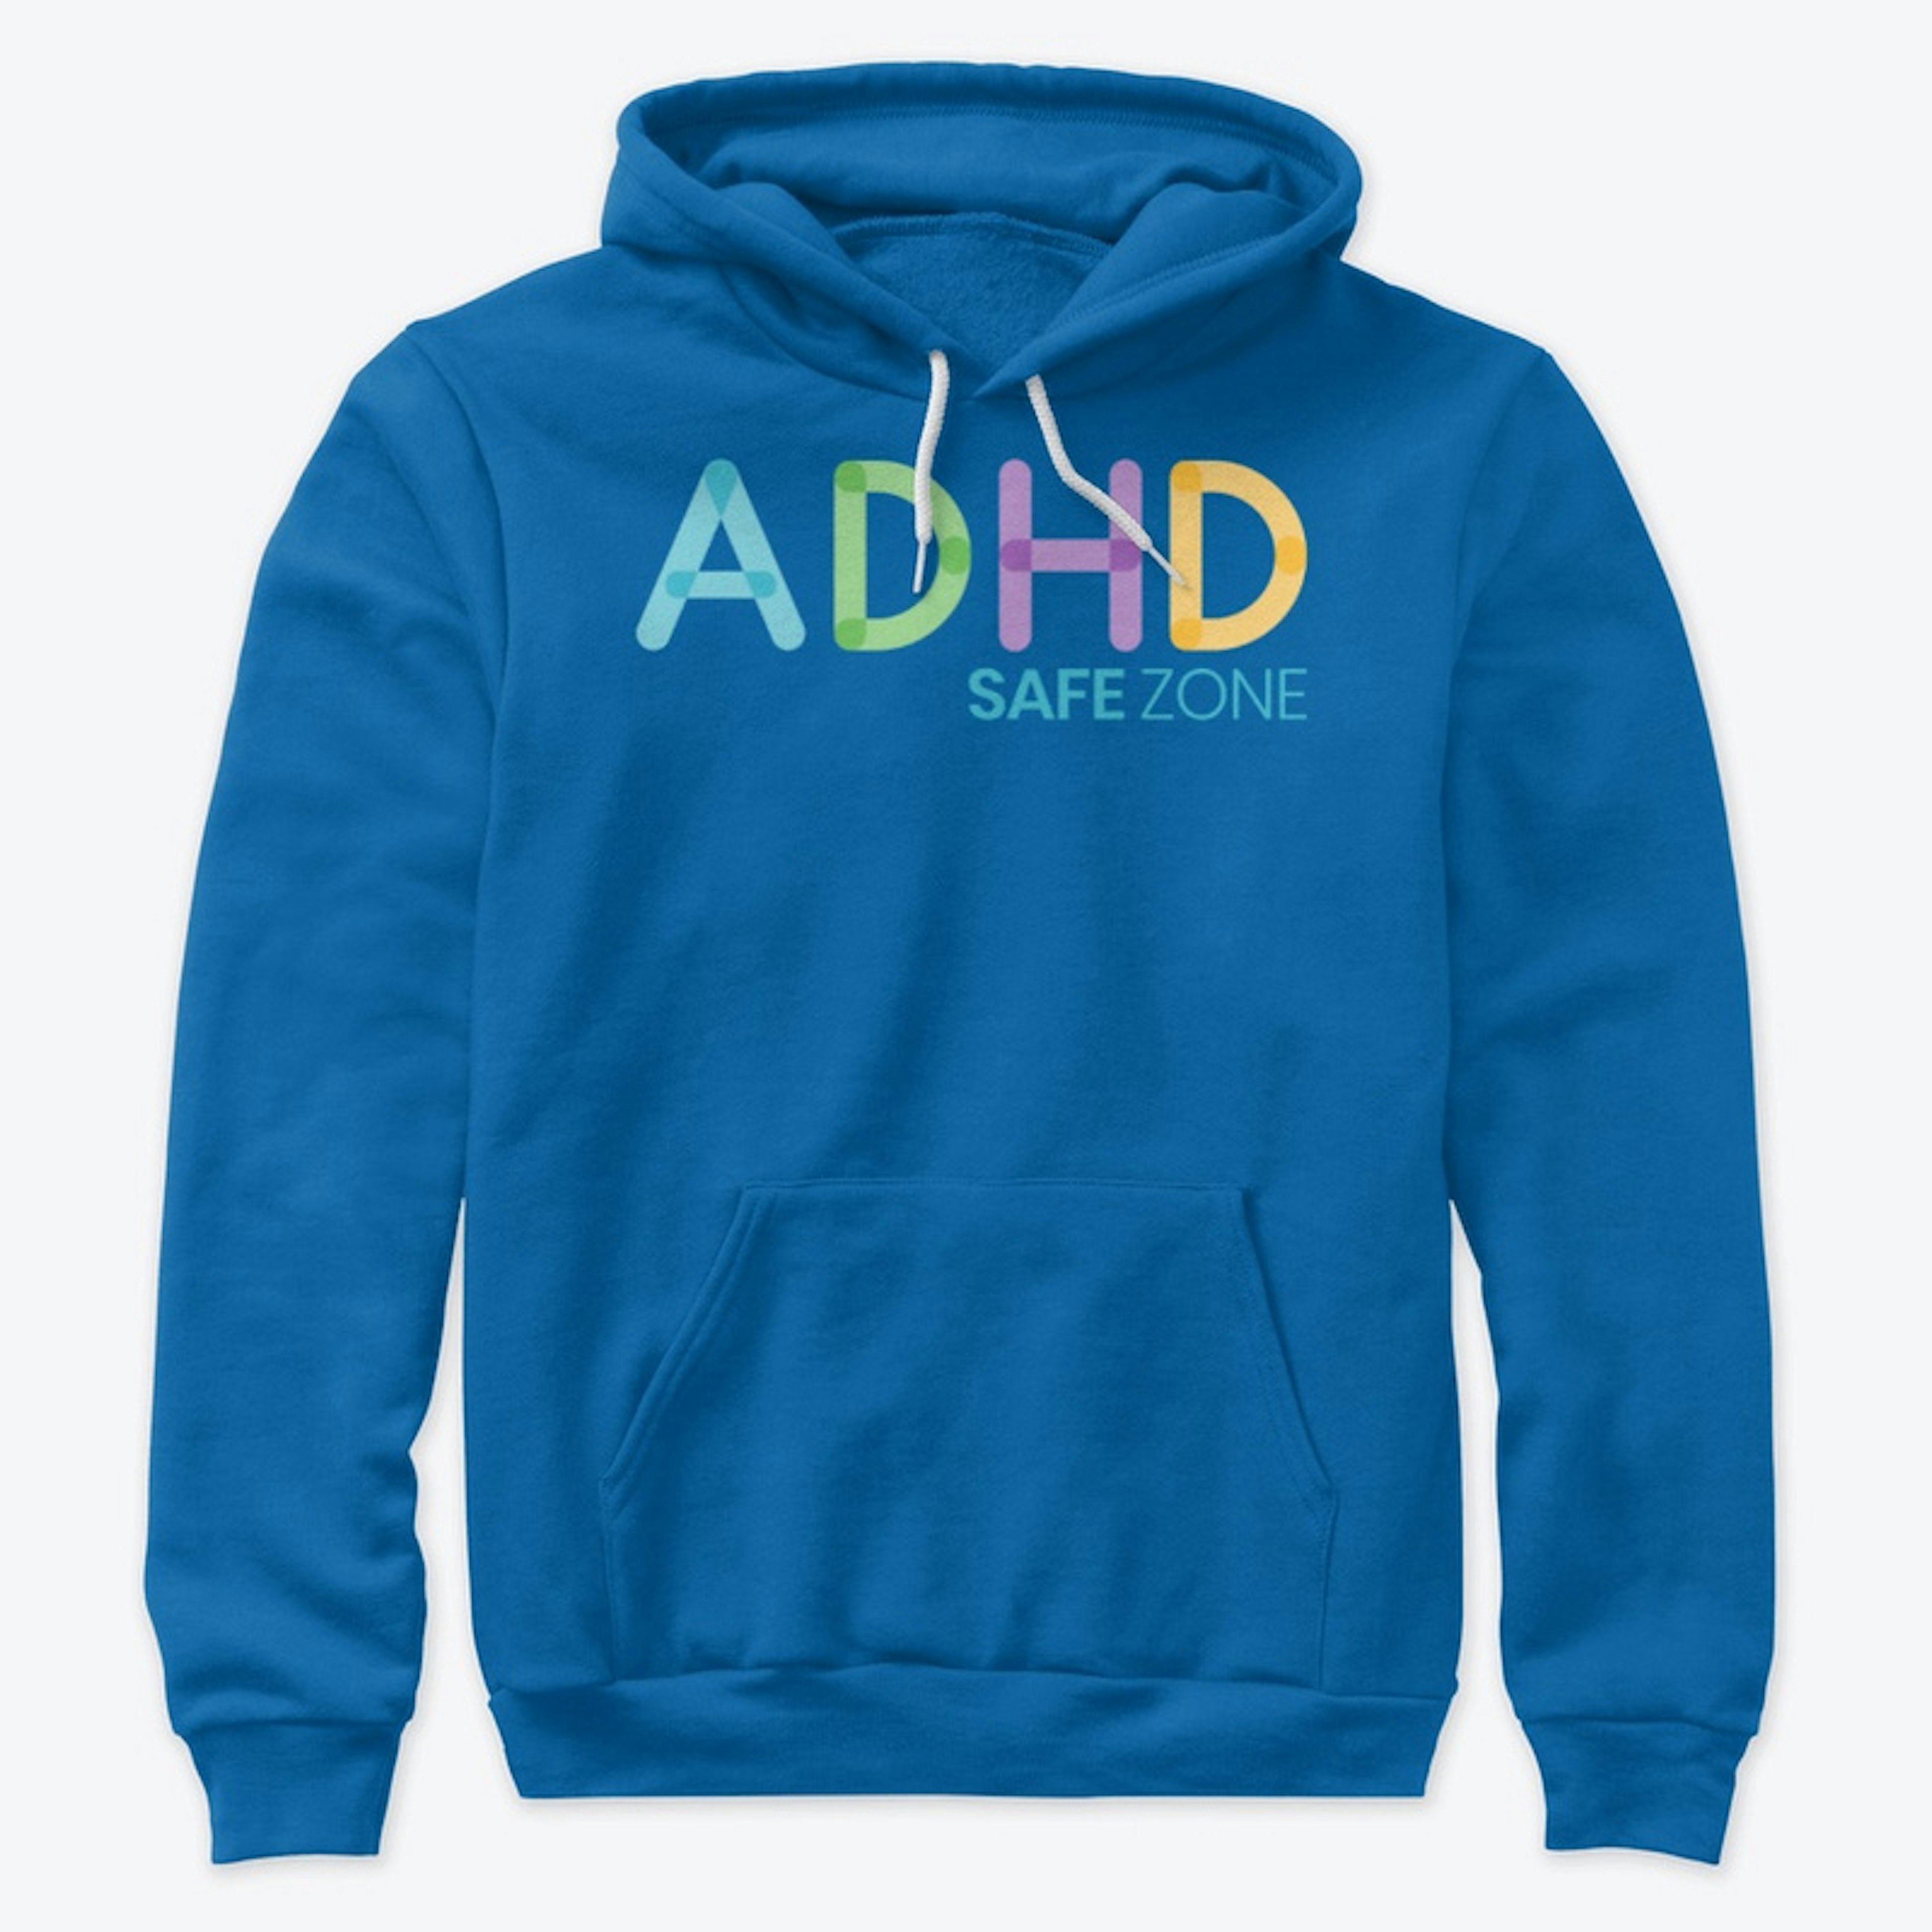 The ADHD Safe Zone